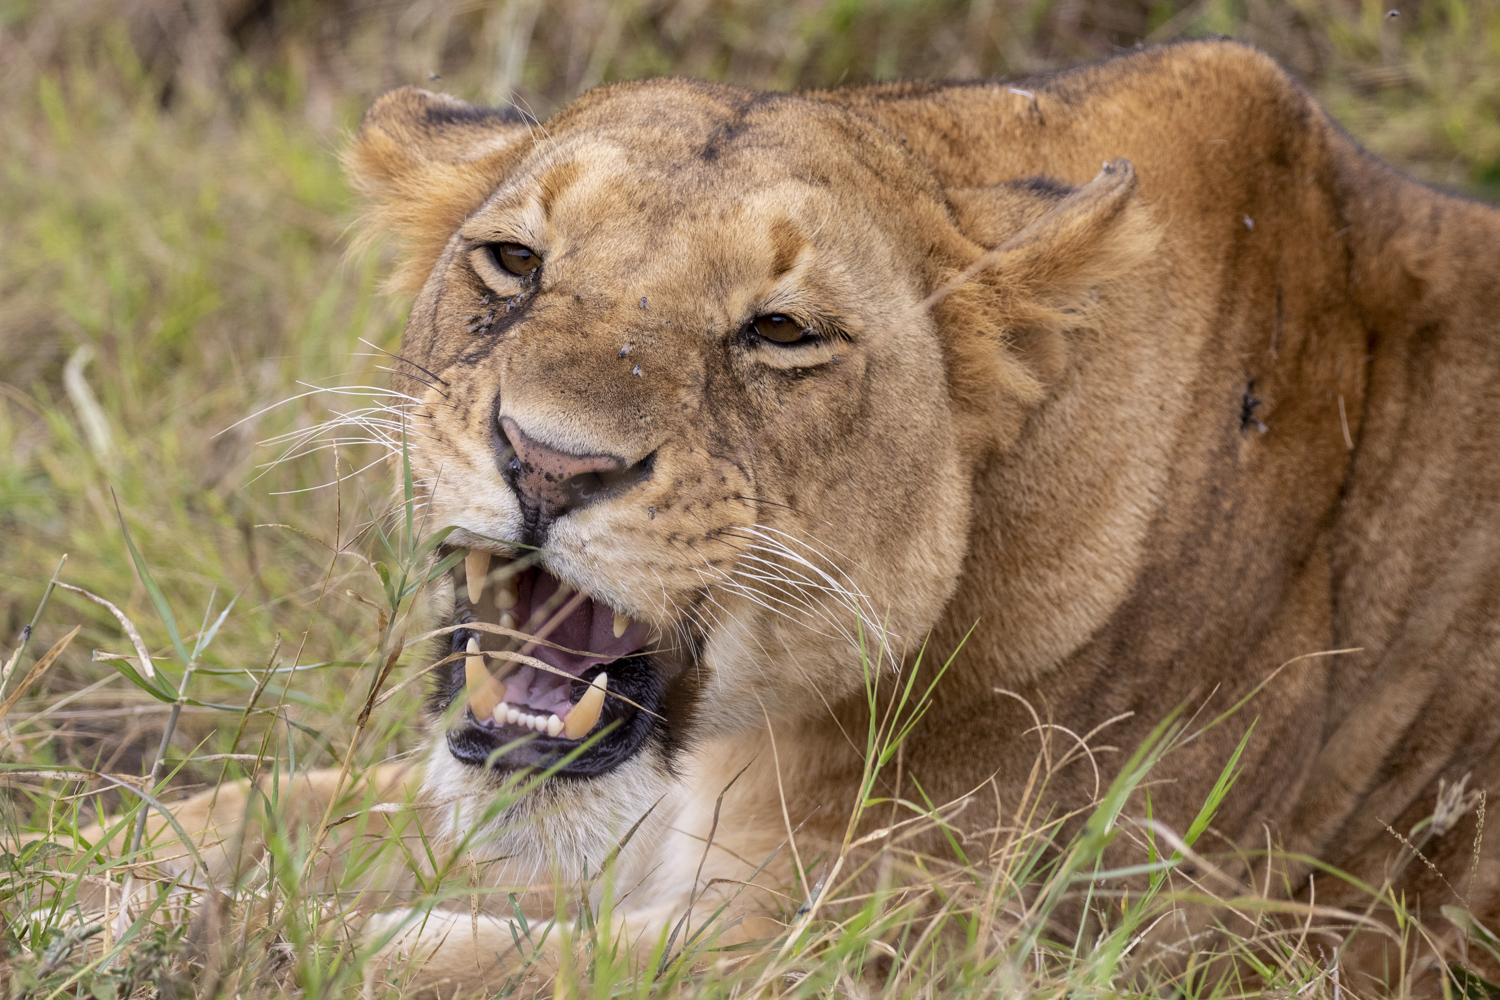 Lioness eating Grass